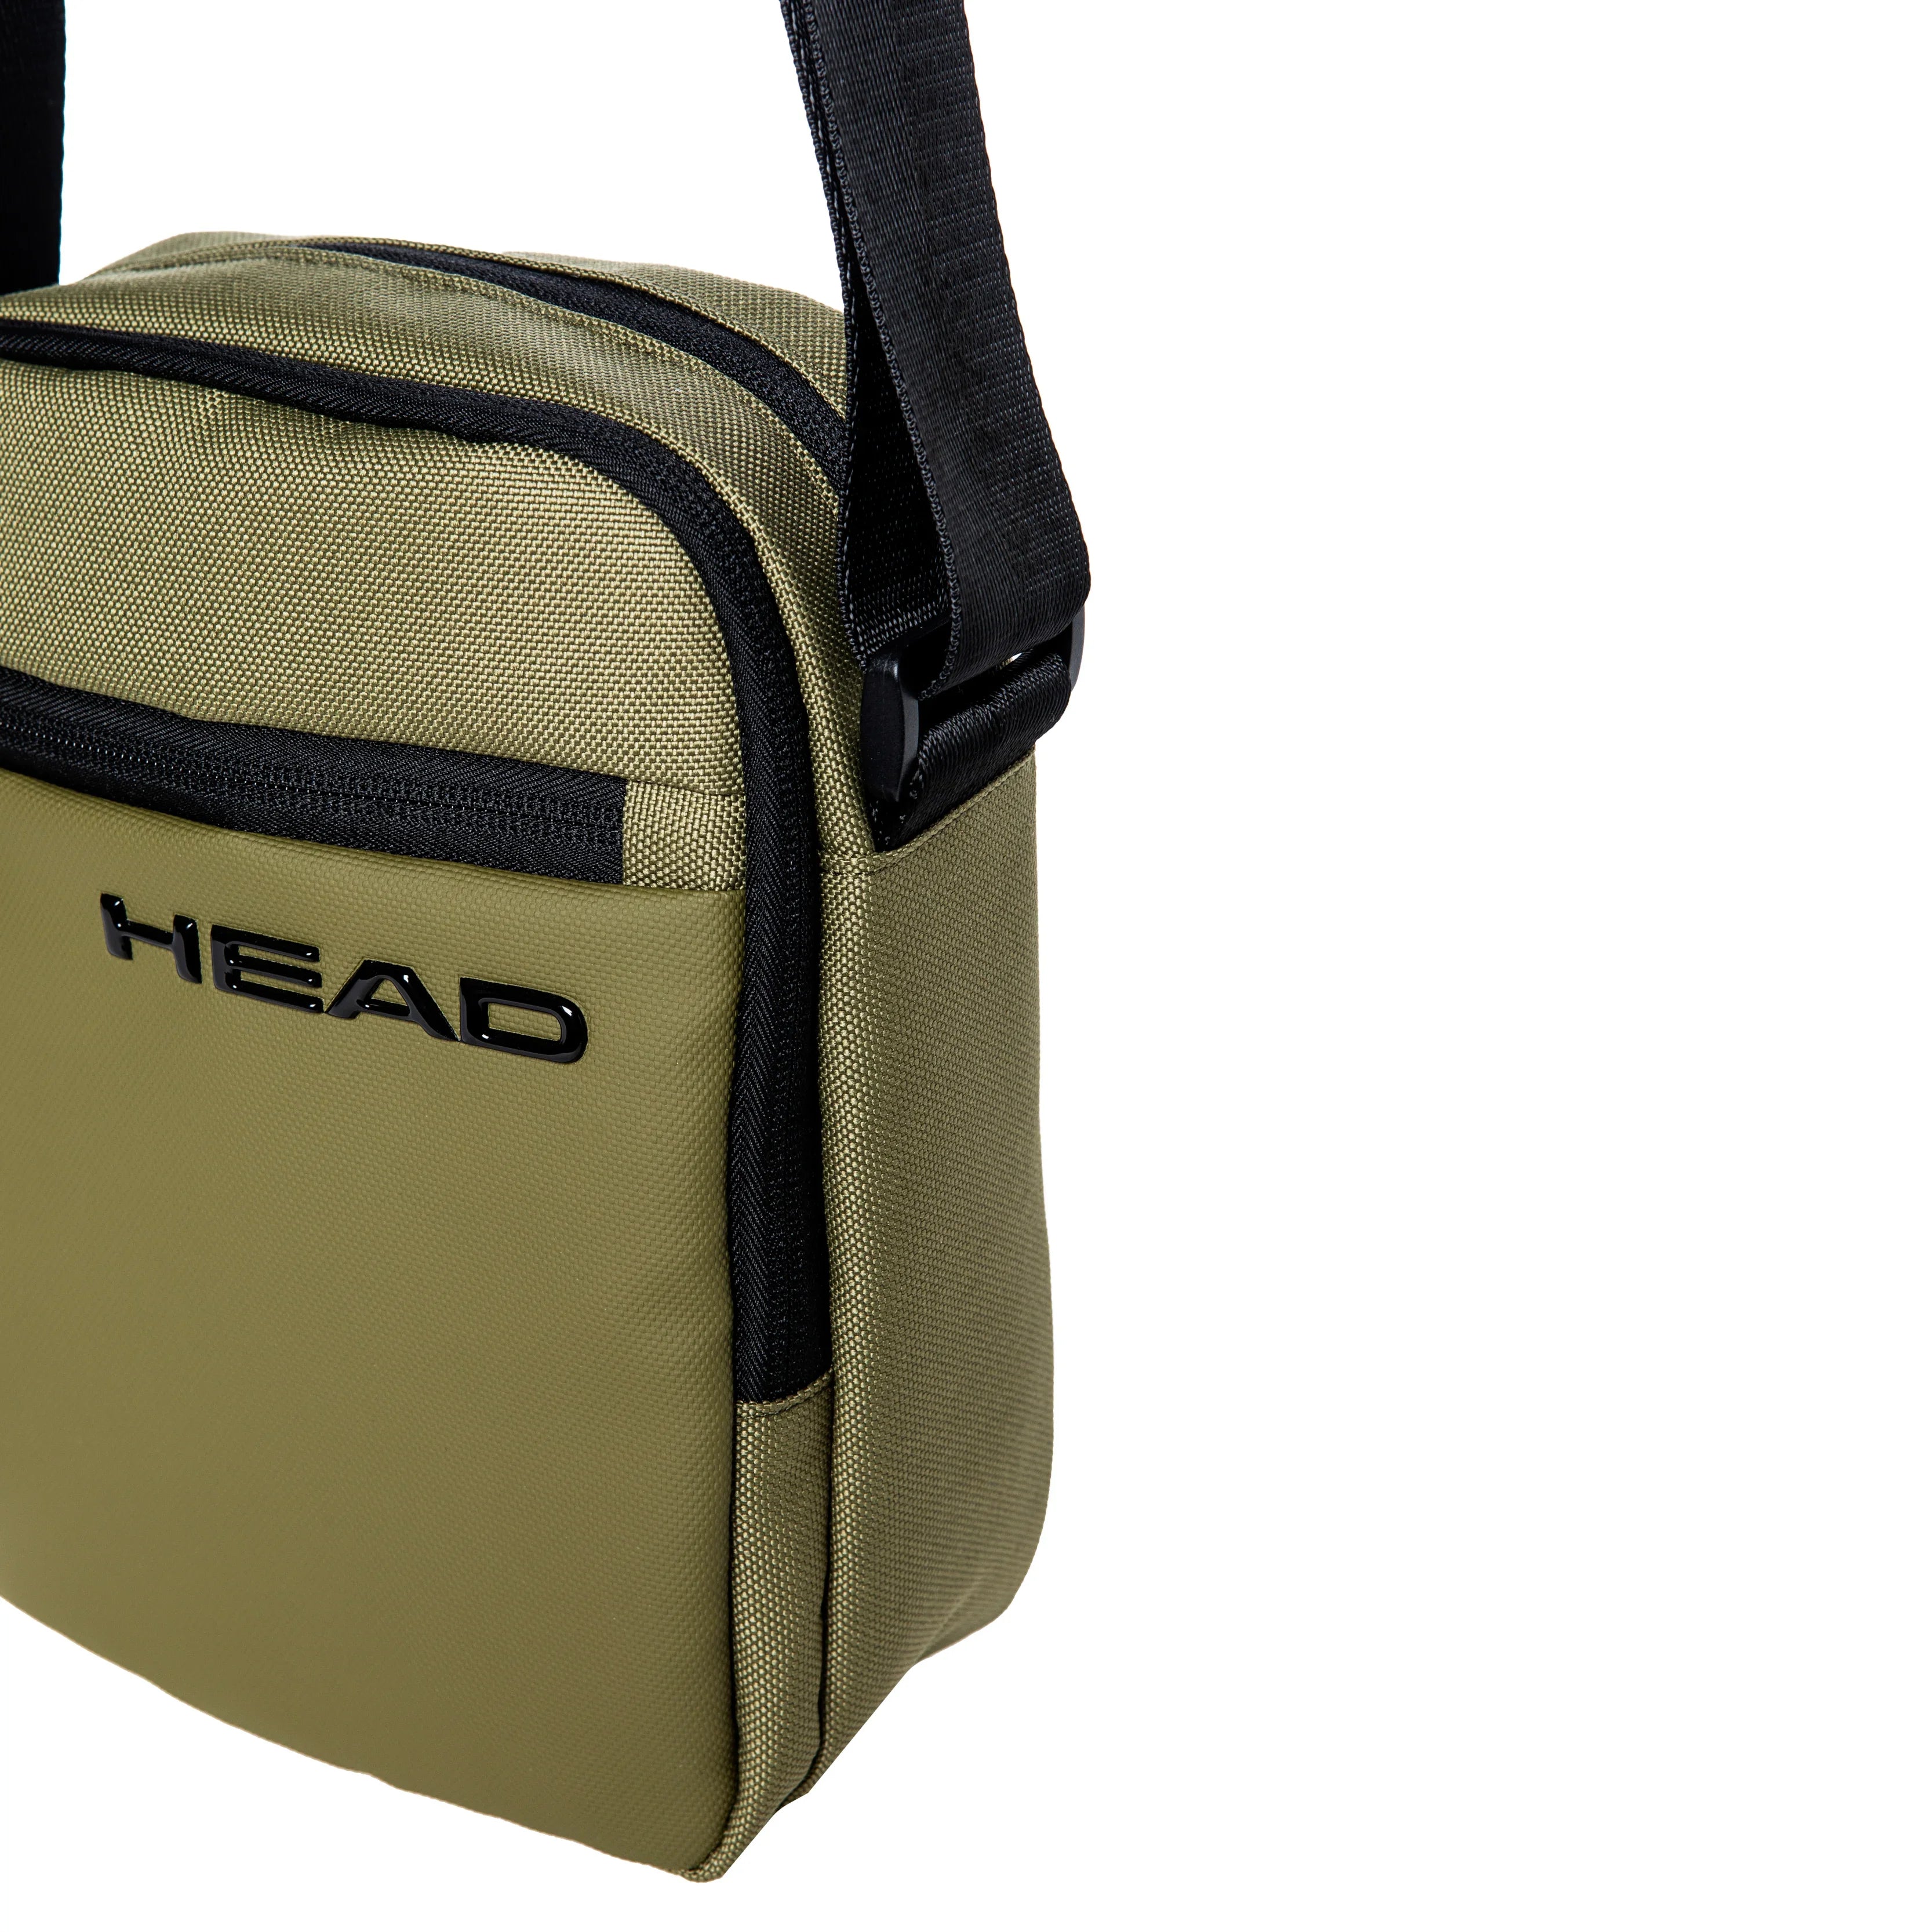 Head Game Reporter 2 Compartments 22 cm - lh grey